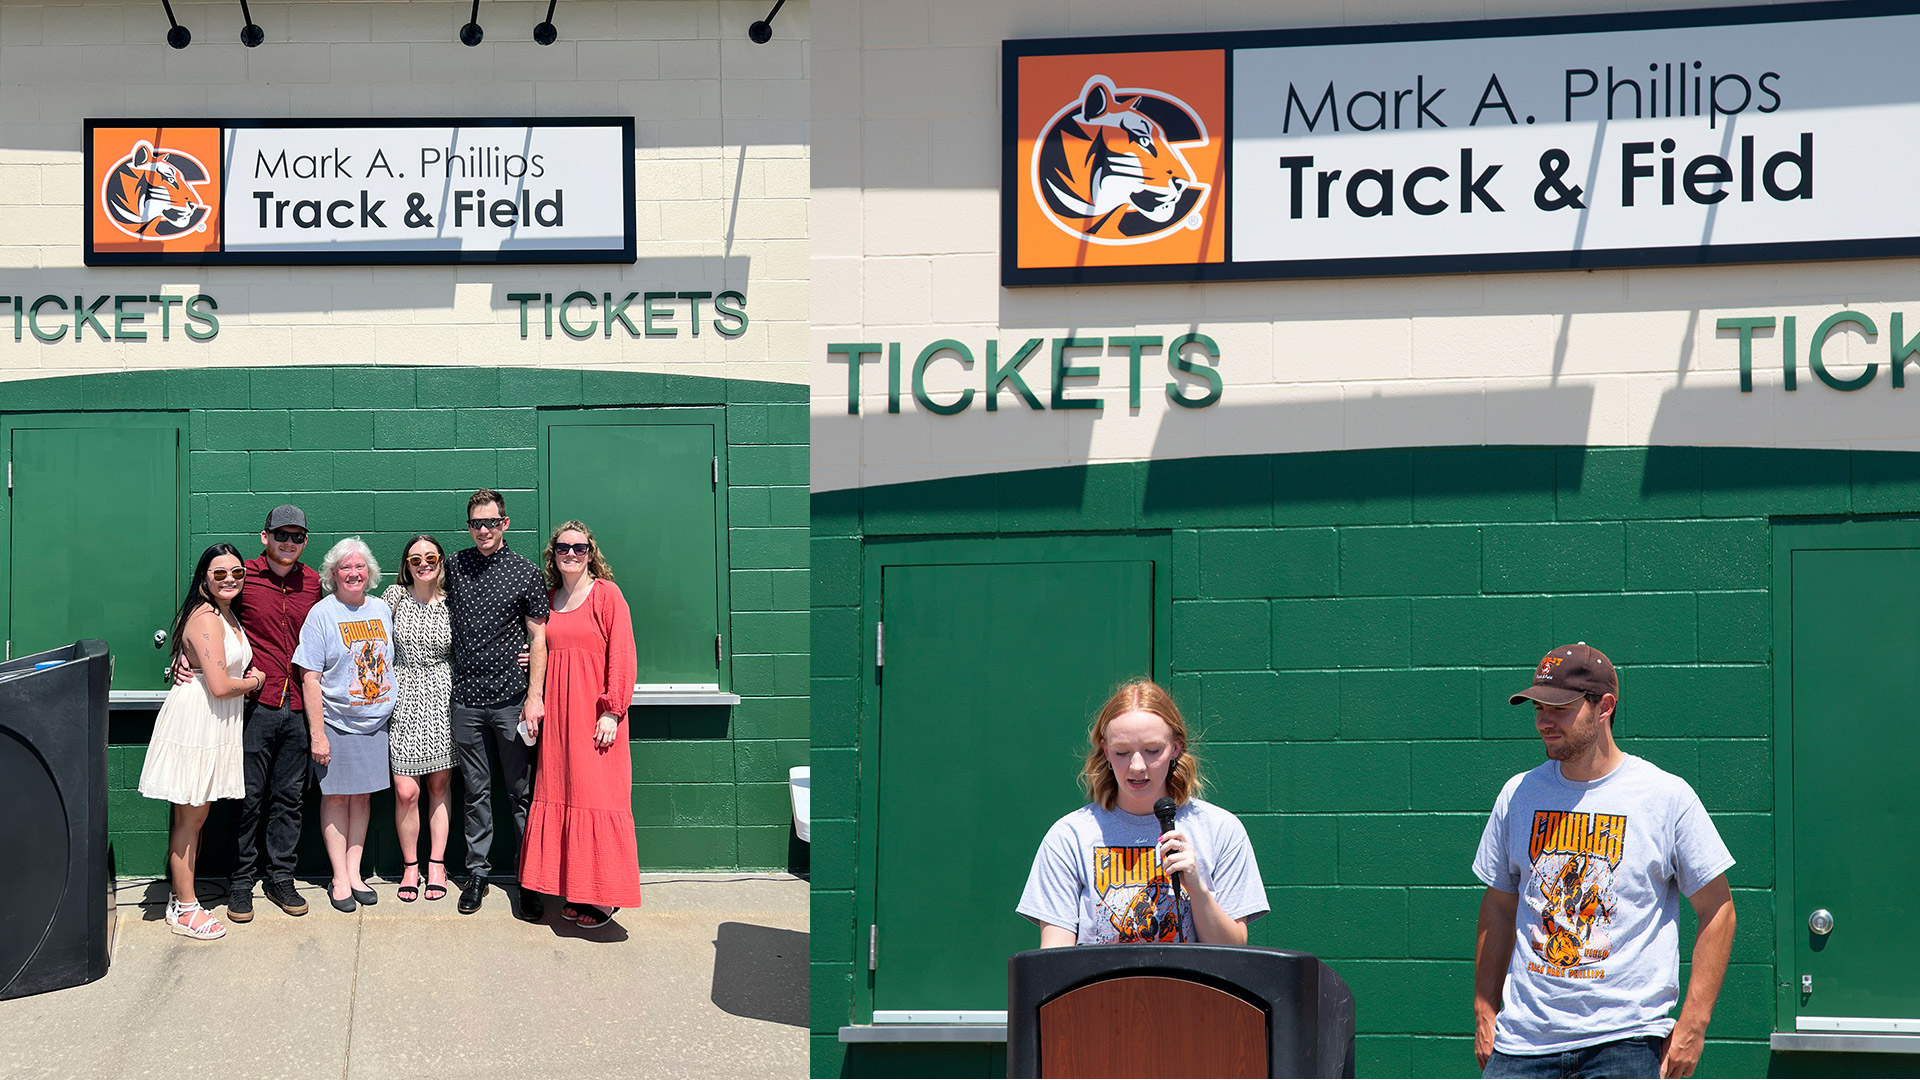 Supporters of legendary track and field coach show their respect during dedication